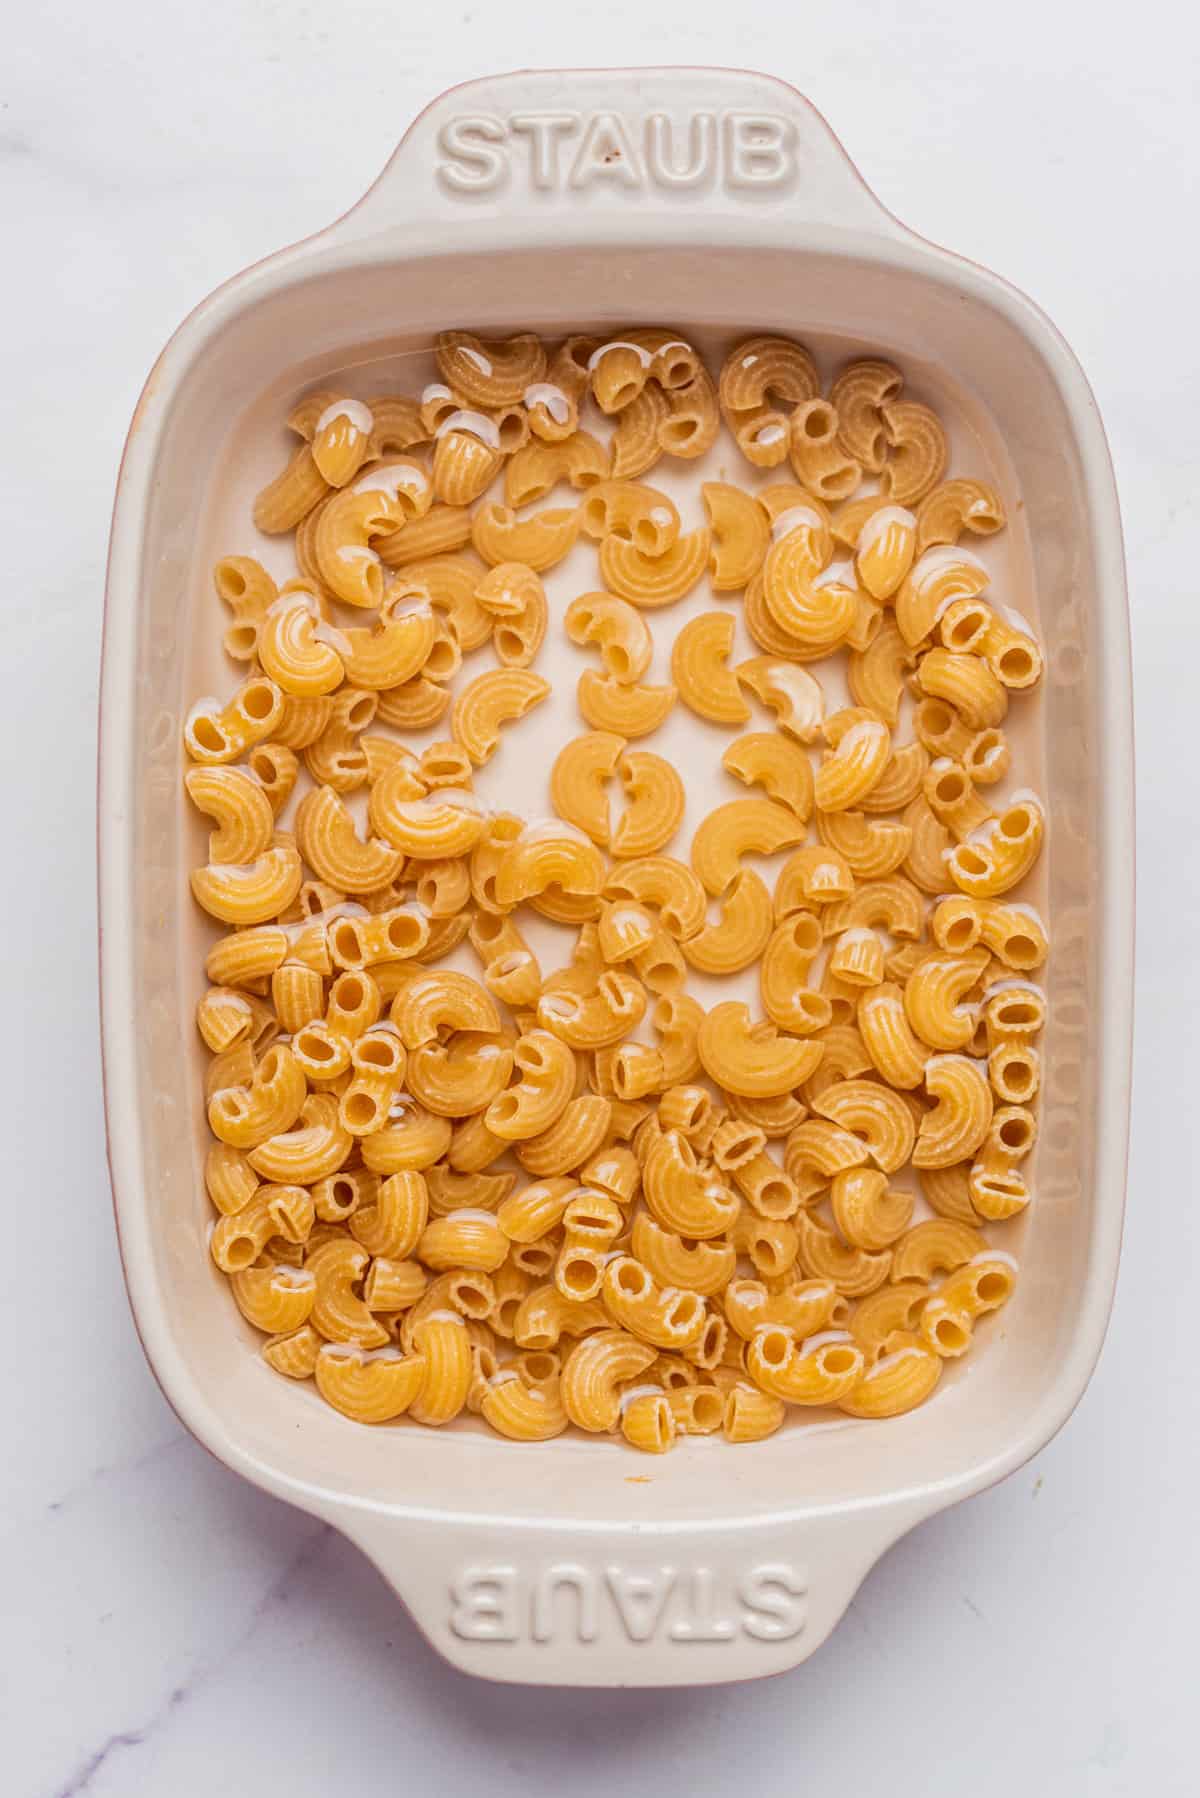 An overhead image of uncooked elbow macaroni pieces in a baking dish.